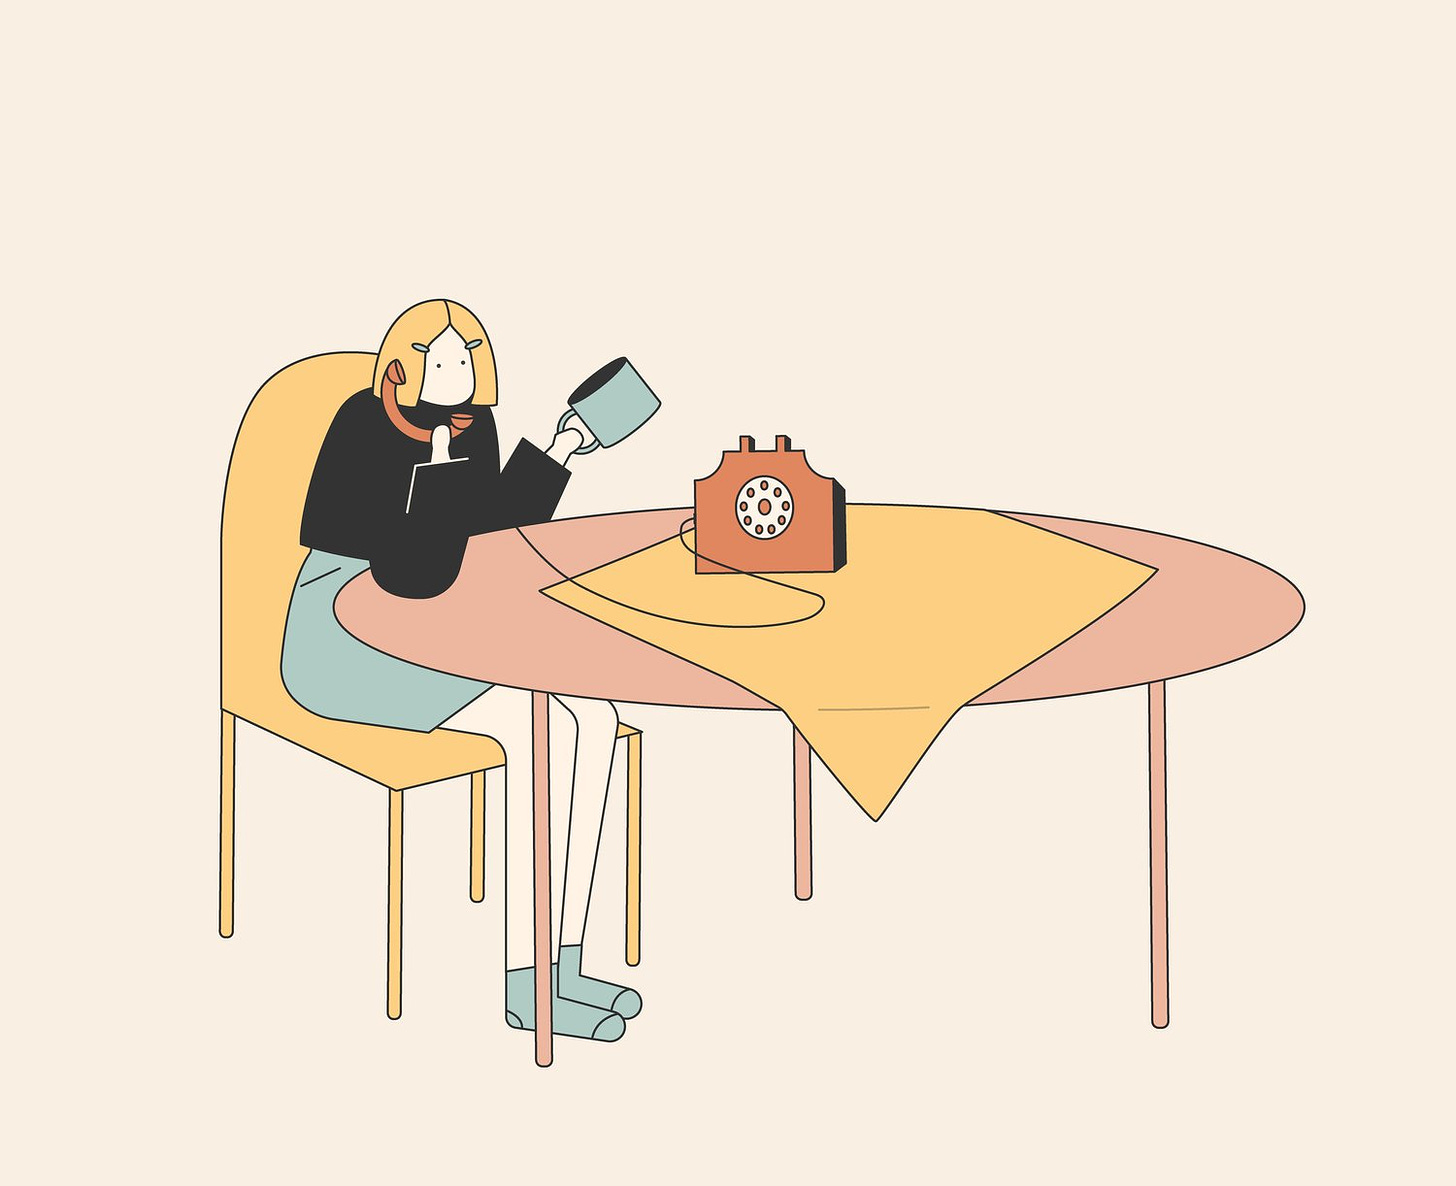 A girl (wearing blue shorts, blue socks, and blue hair clips) sitting at a table and talking on an old dial-up phone.